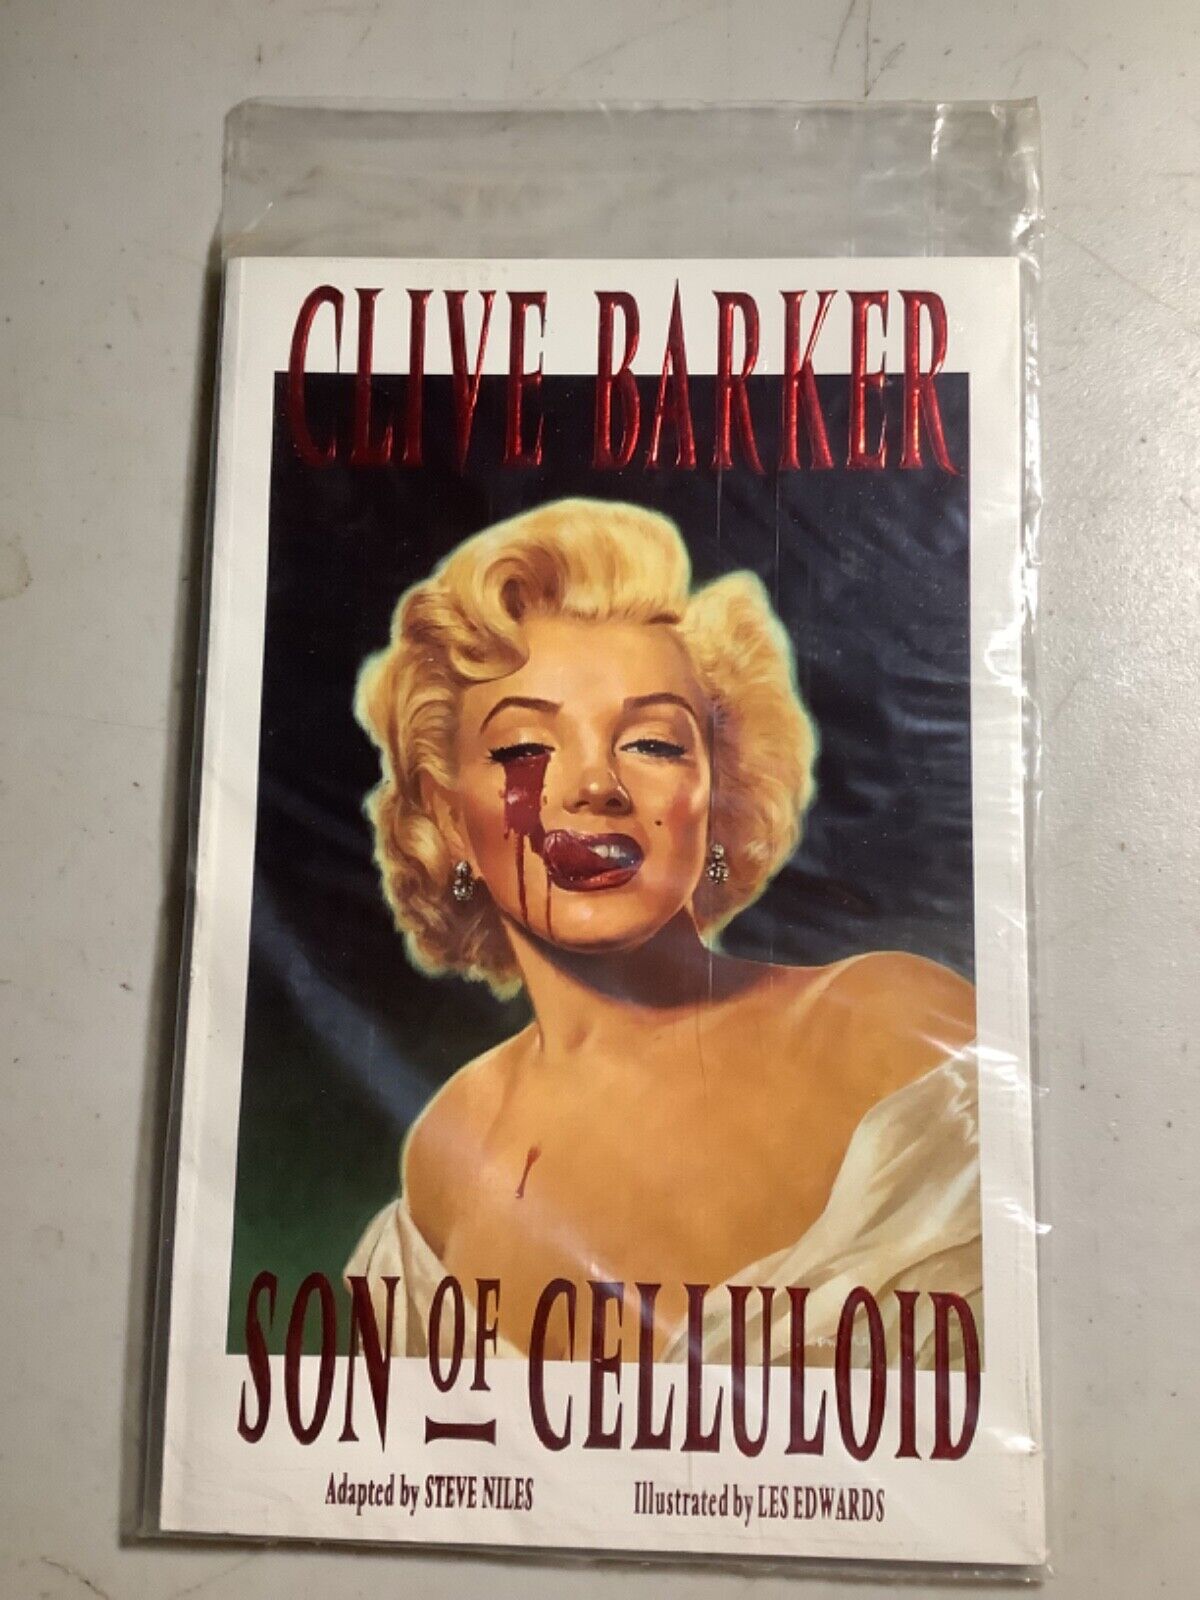 Clive Barker Son of Celluloid sealed